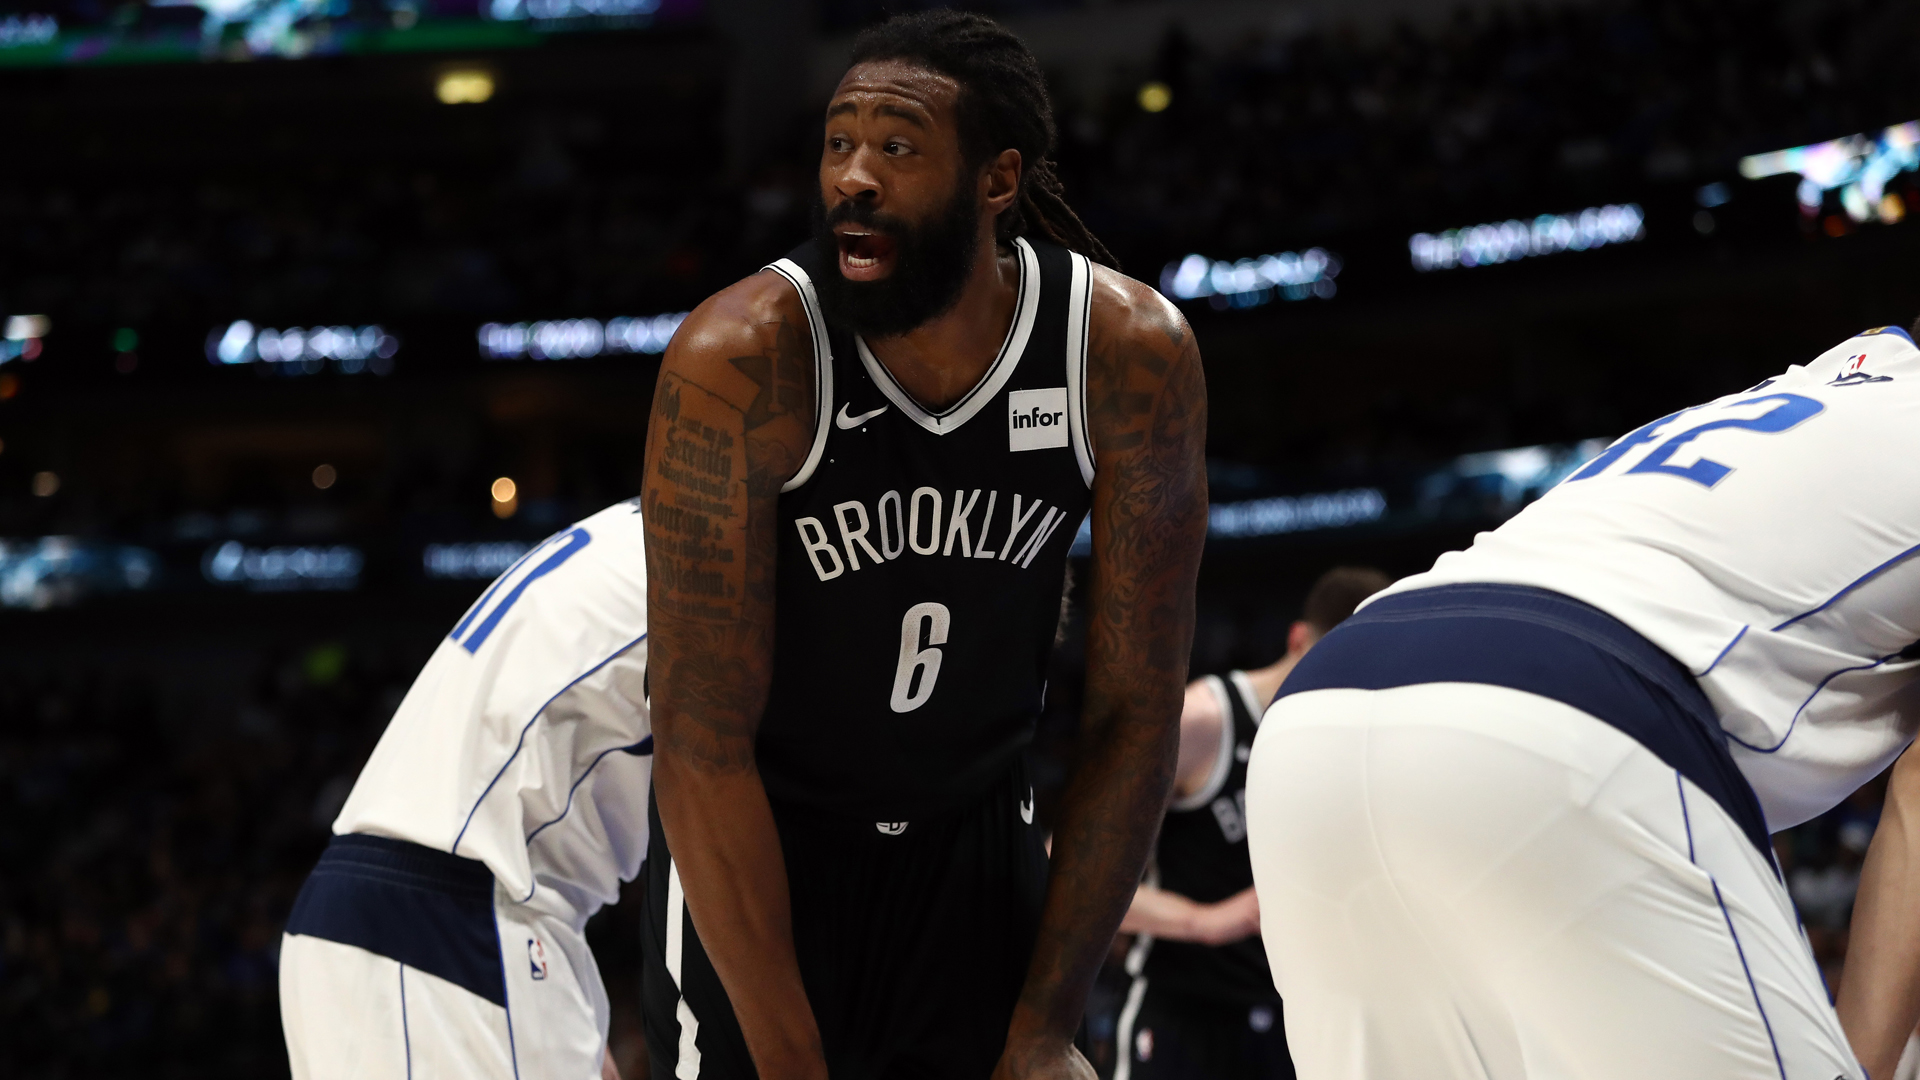 The Brooklyn Nets will be without center DeAndre Jordan when the NBA season resumes.